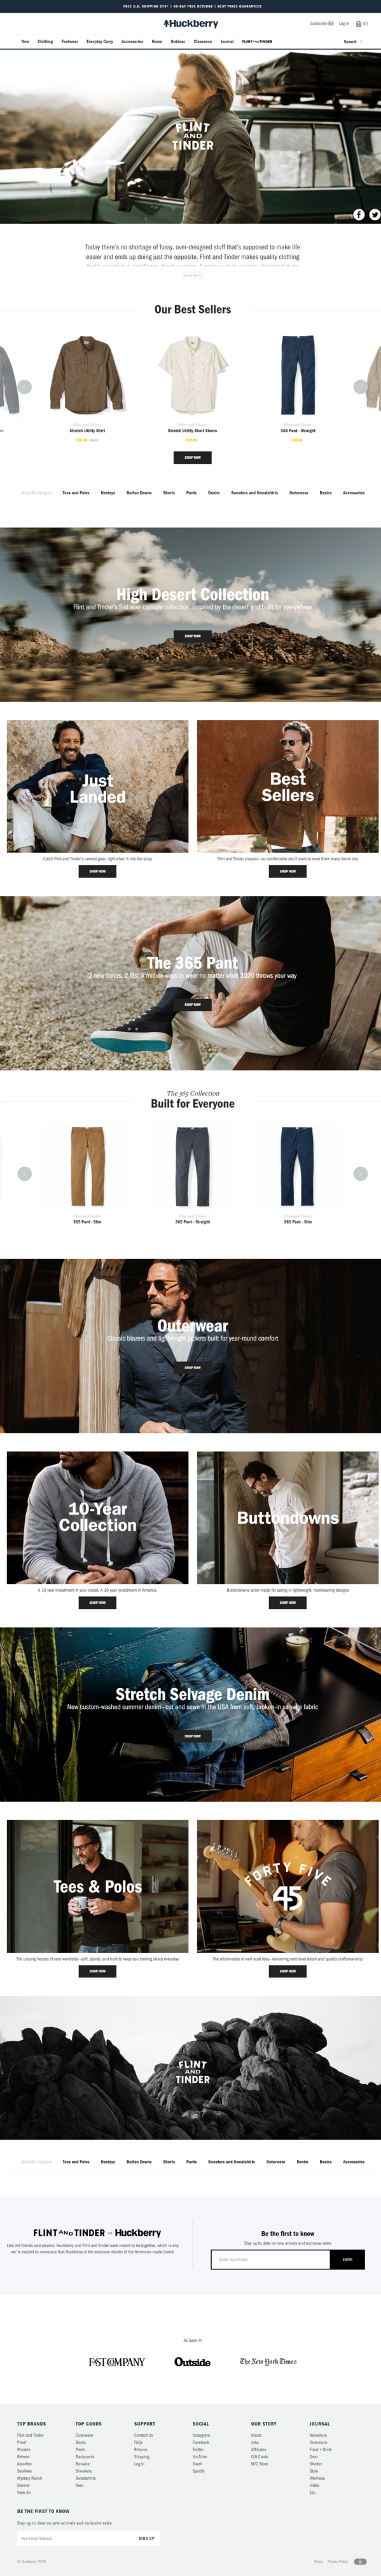 Flint and Tinder  The Official Shop   Huckberry.png